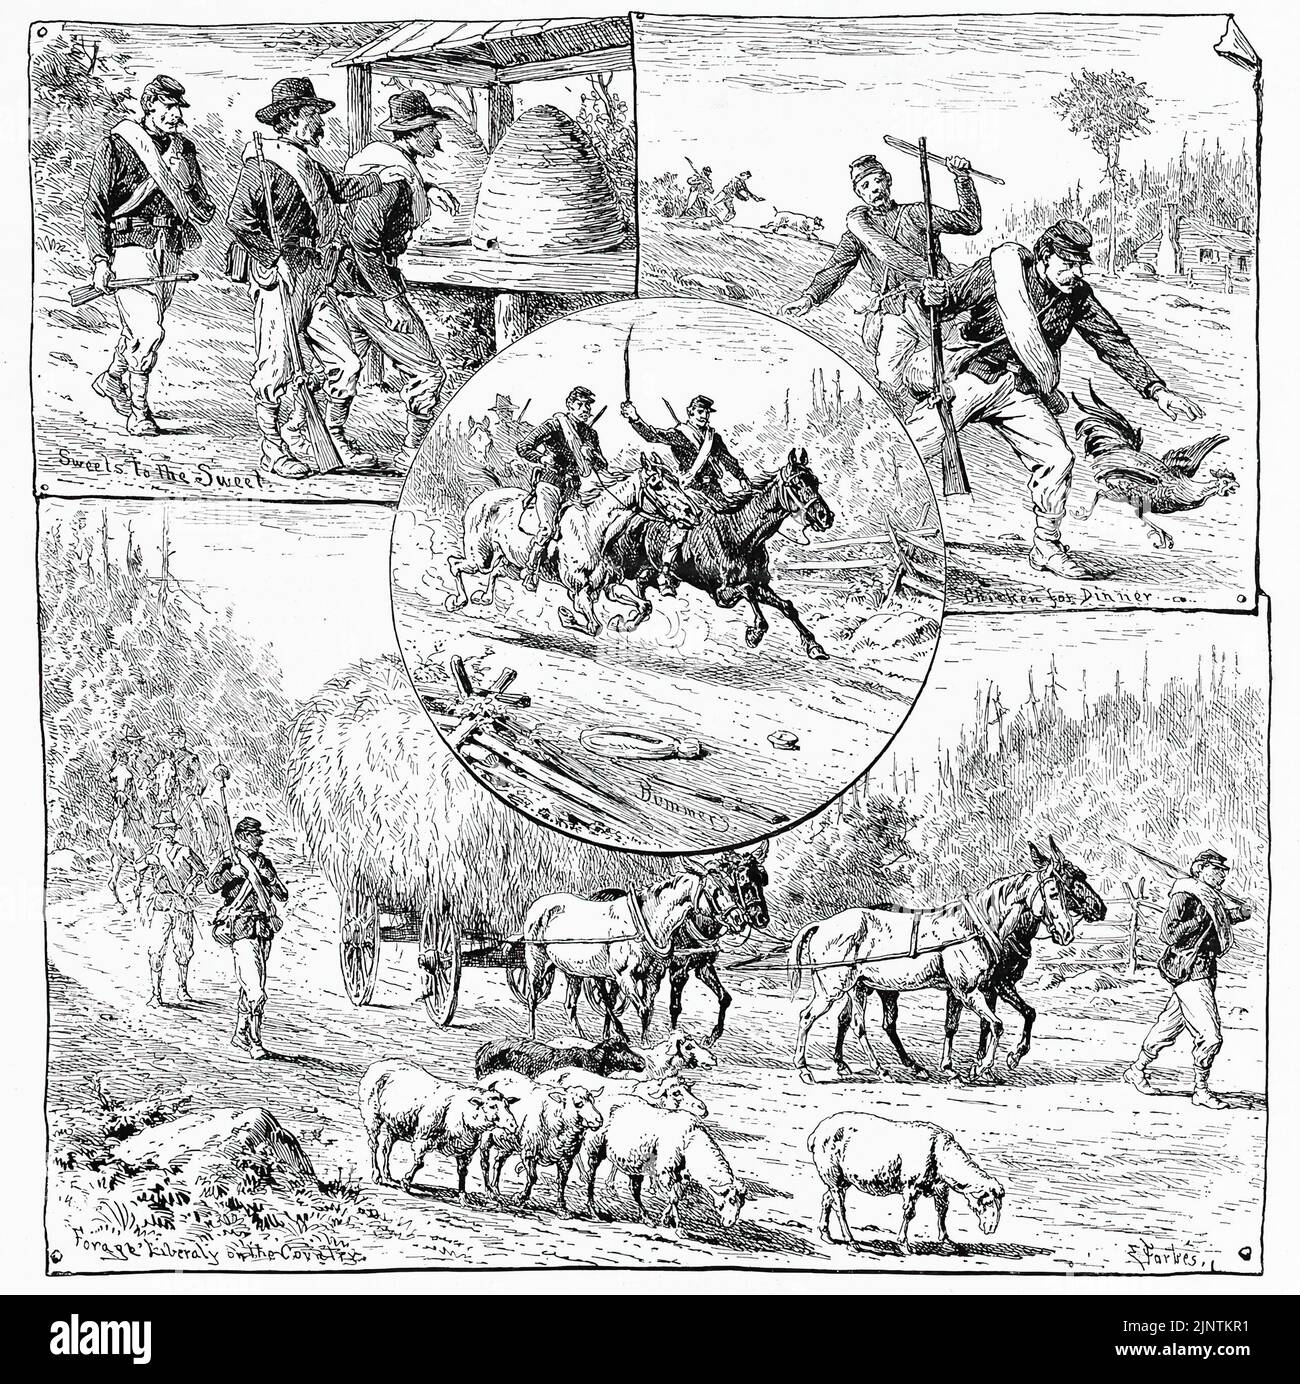 Scenes of the Bummers, Foragers in Sherman's Union Army - Sweets to the Sweet, Chicken for Dinner, Forage Liberally on the Country. Illustrazione della guerra civile americana del 19th secolo di Edwin Forbes Foto Stock